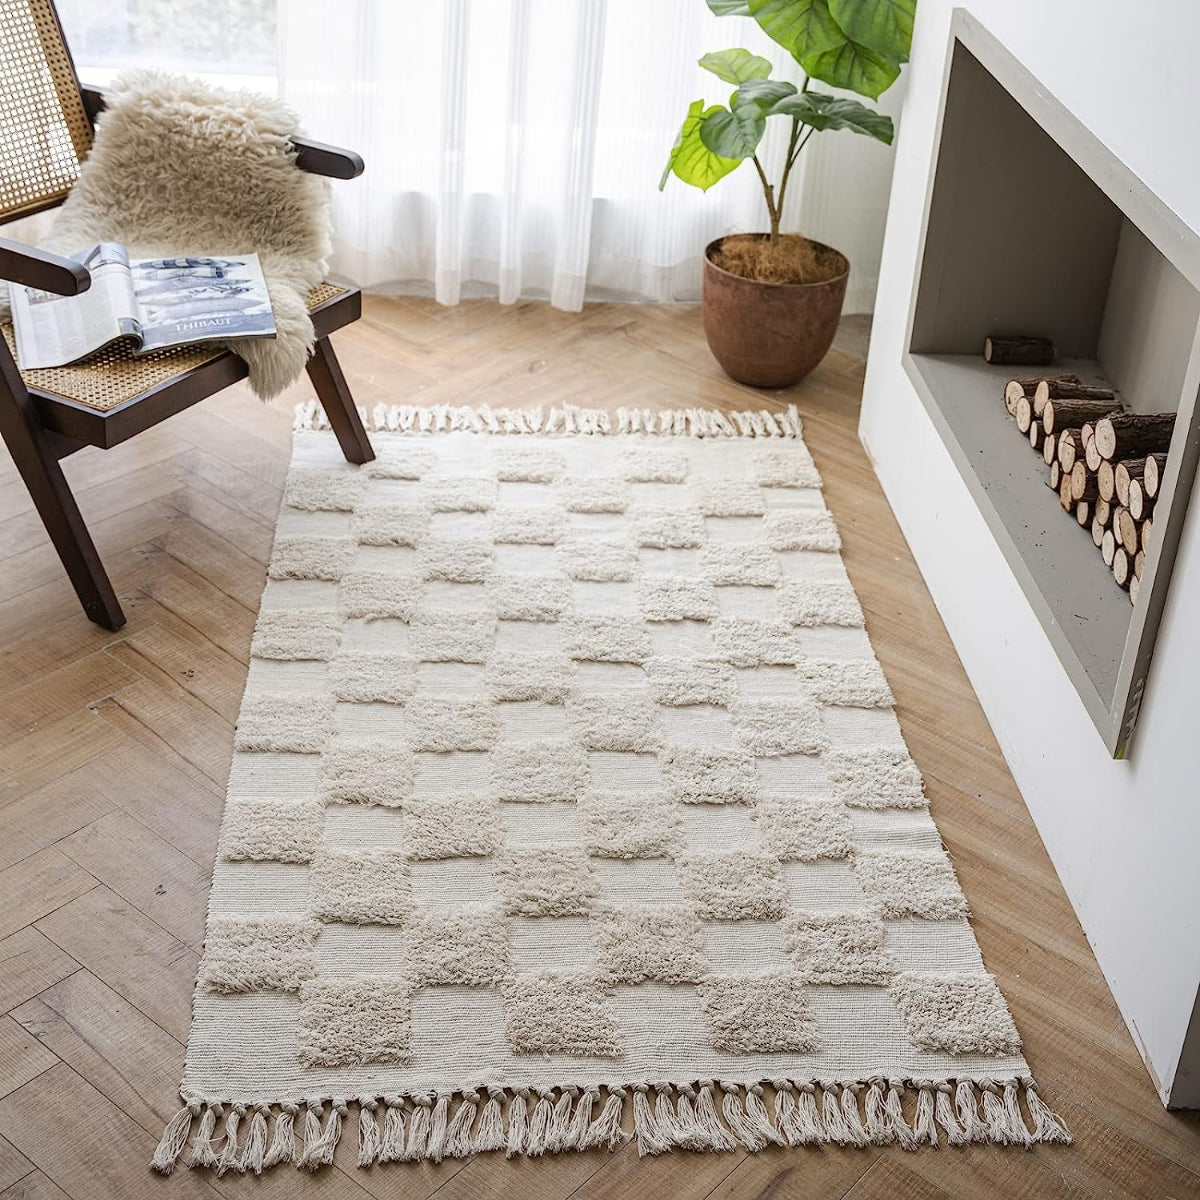 Lahome Boho Bathroom Rugs, Small 2x3 Entry Rug Washable Front Door Bath Mat  Woven Cotton Area Rug with Tassels, Farmhouse Non-Shedding Lightweight